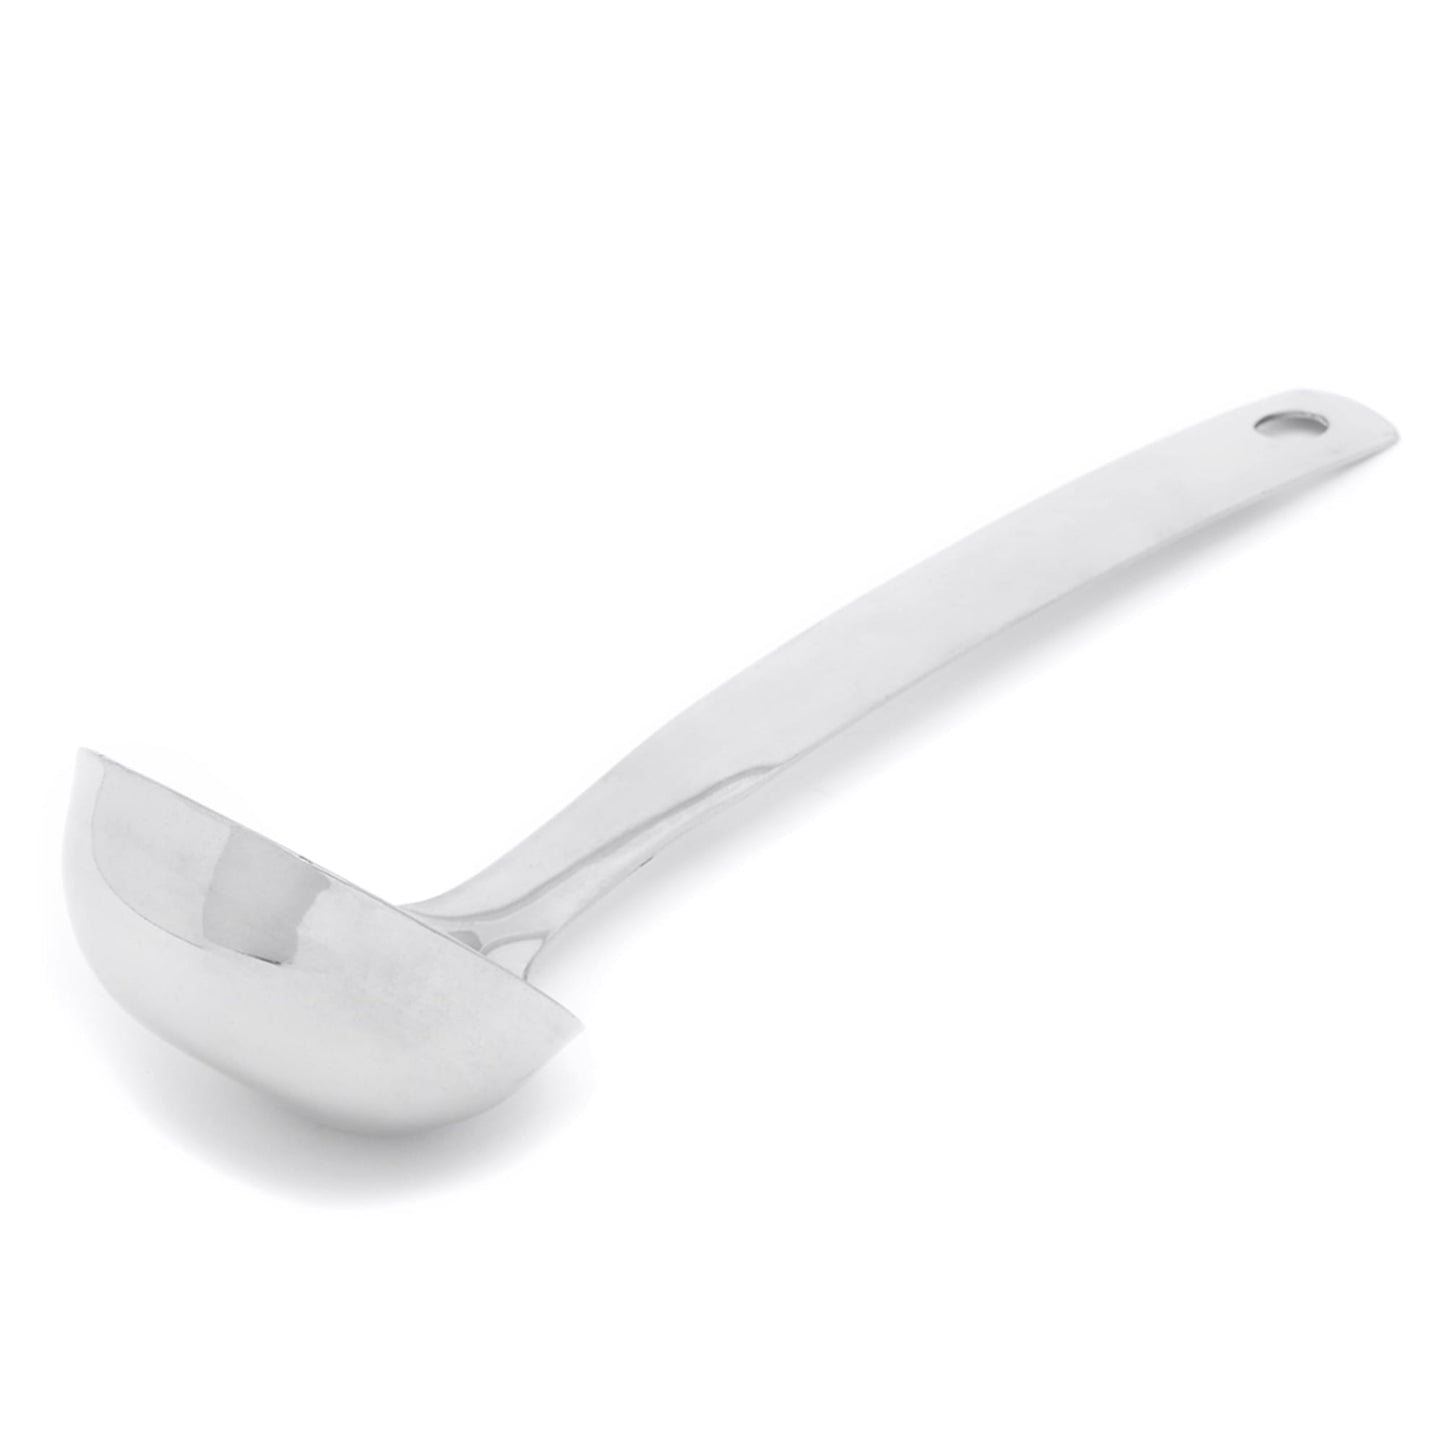 Stainless Steel Aster Ladle